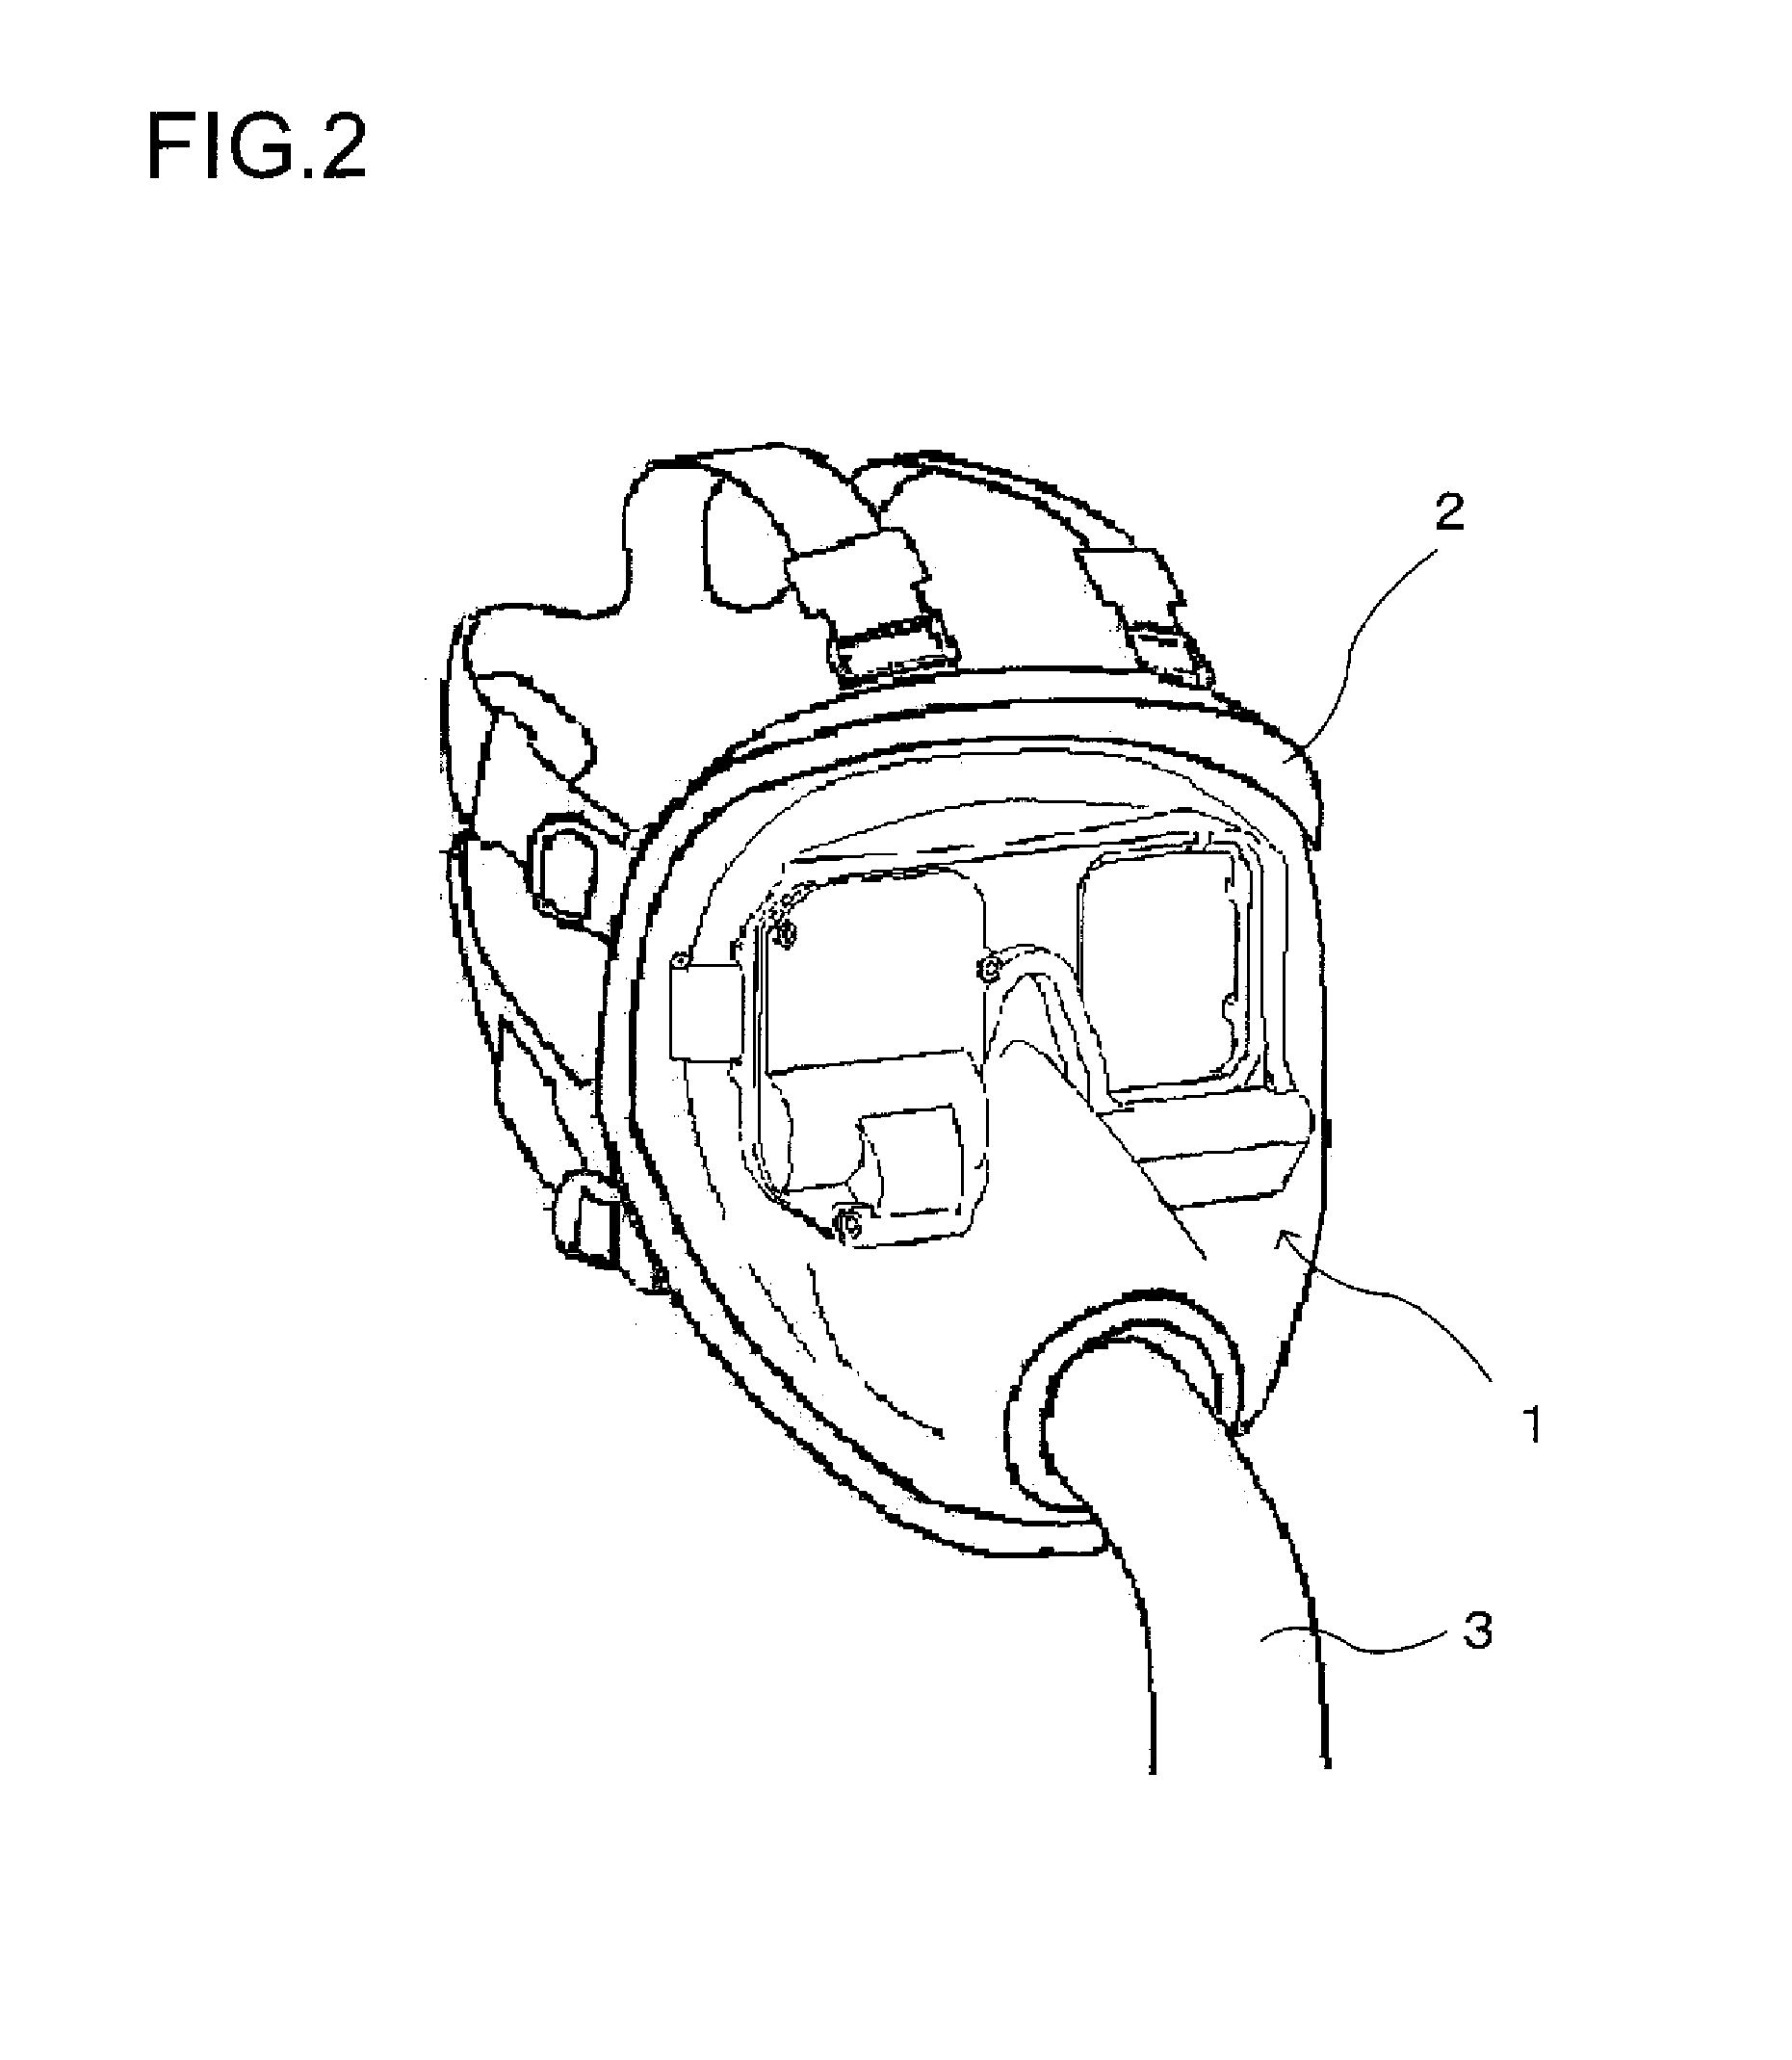 Image display unit and face piece unit